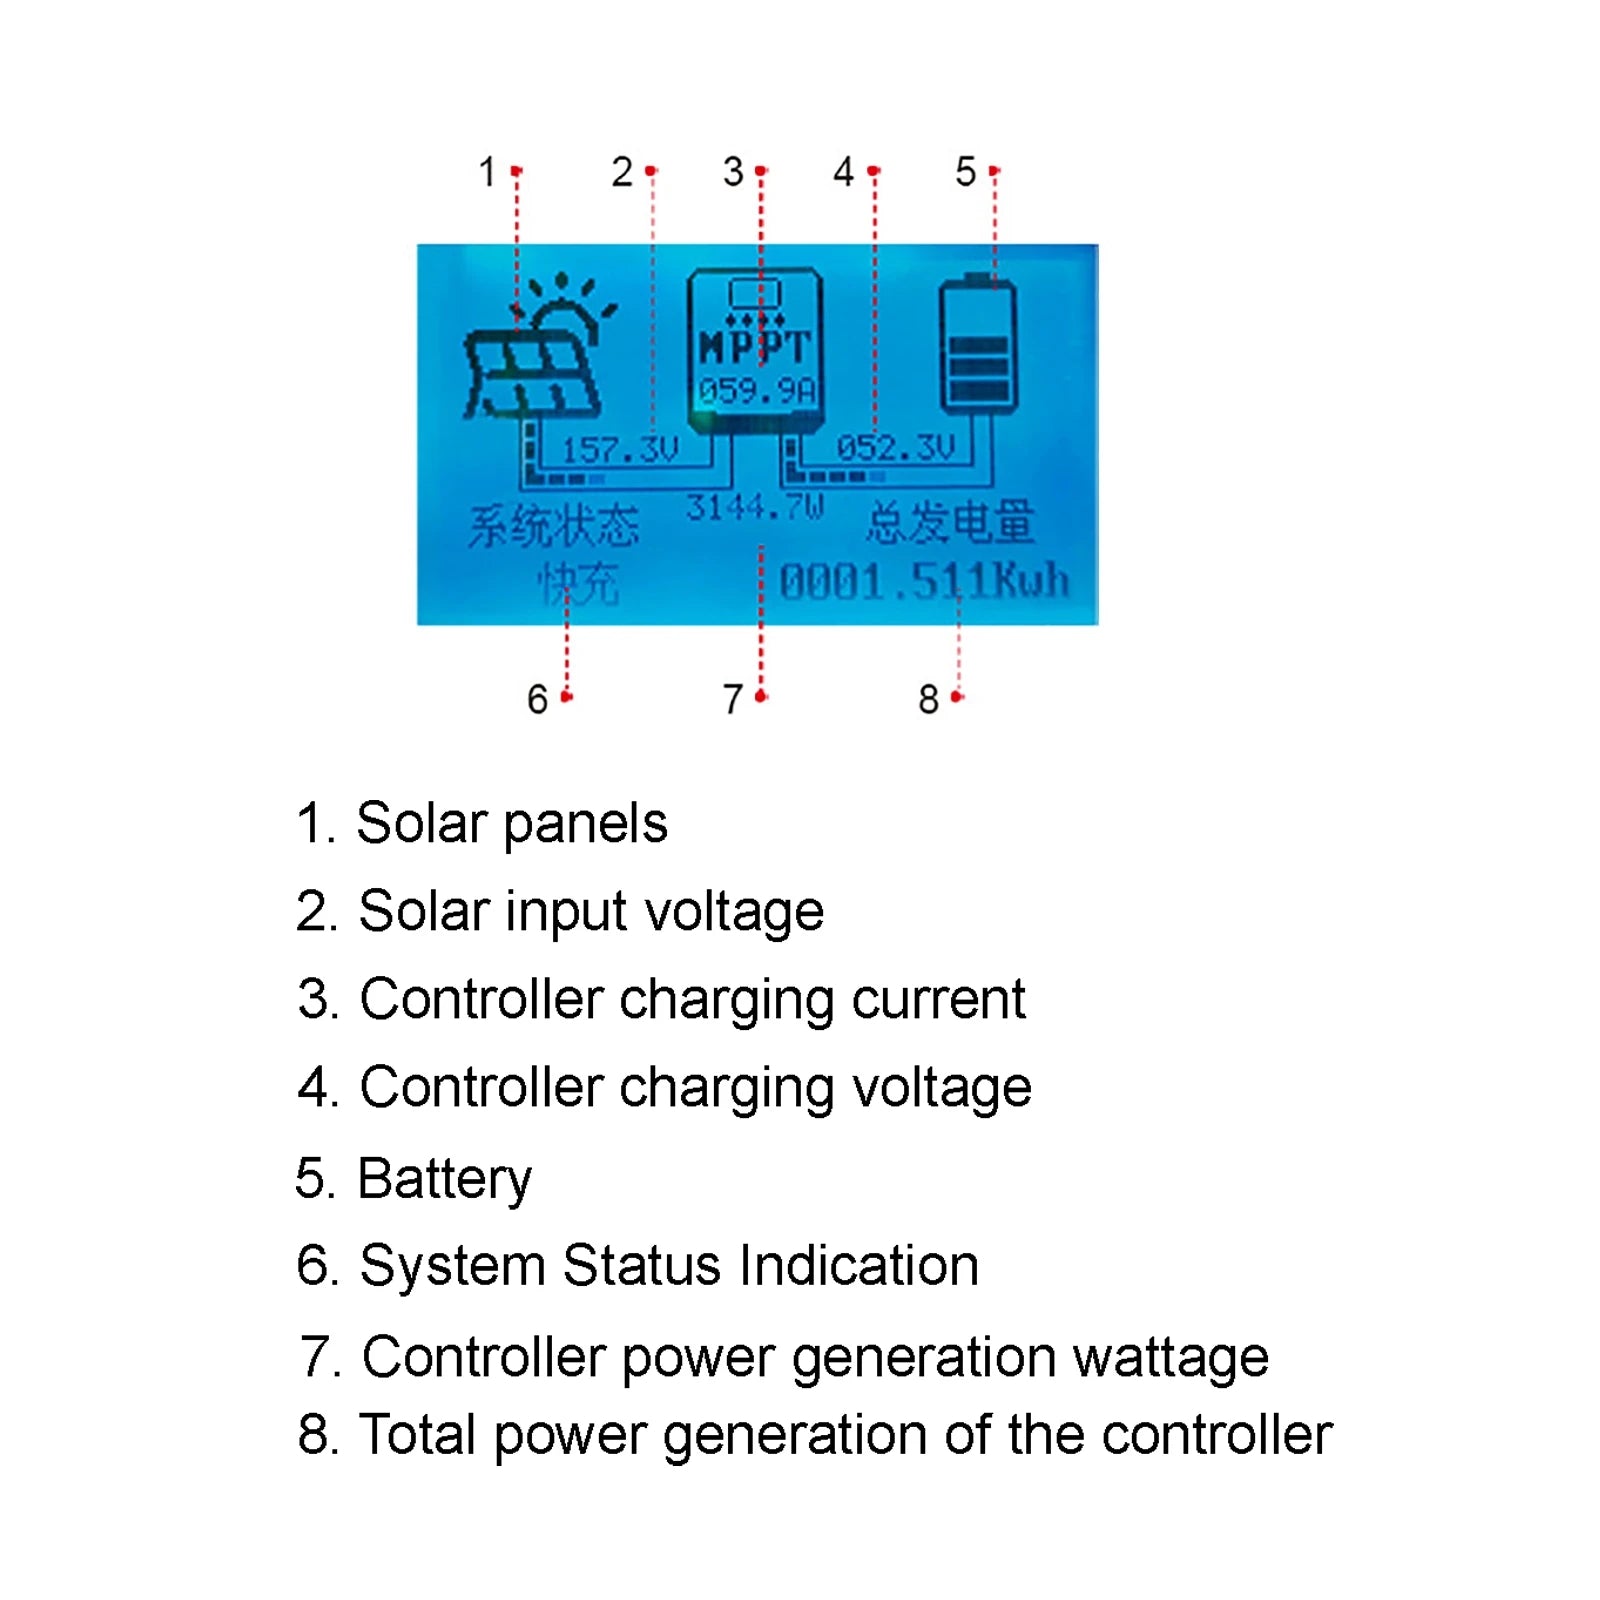 50A 60A MPPT Solar Charge Controller, Solar charge controller with MPPT technology for LiFePo4 batteries, supporting 12-96V inputs and 5A charging.